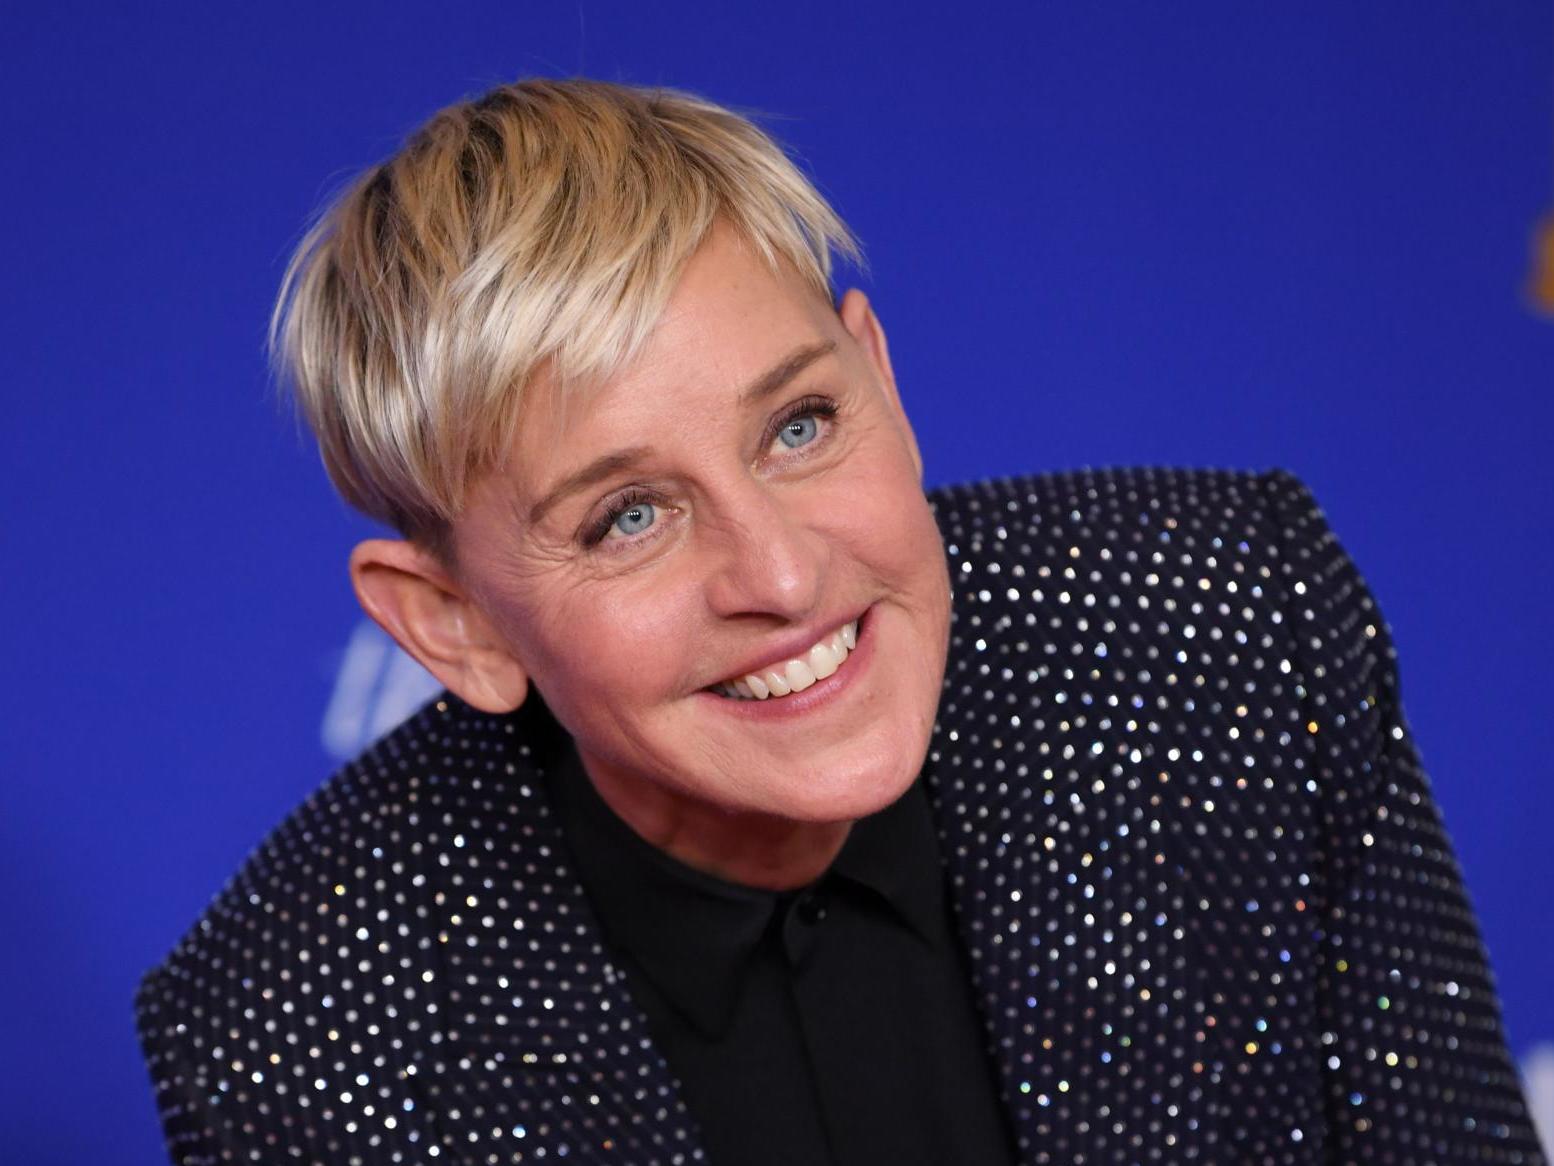 DeGeneres has been trailed by career woe after career woe this year following numerous allegations of ‘mean’ behaviour